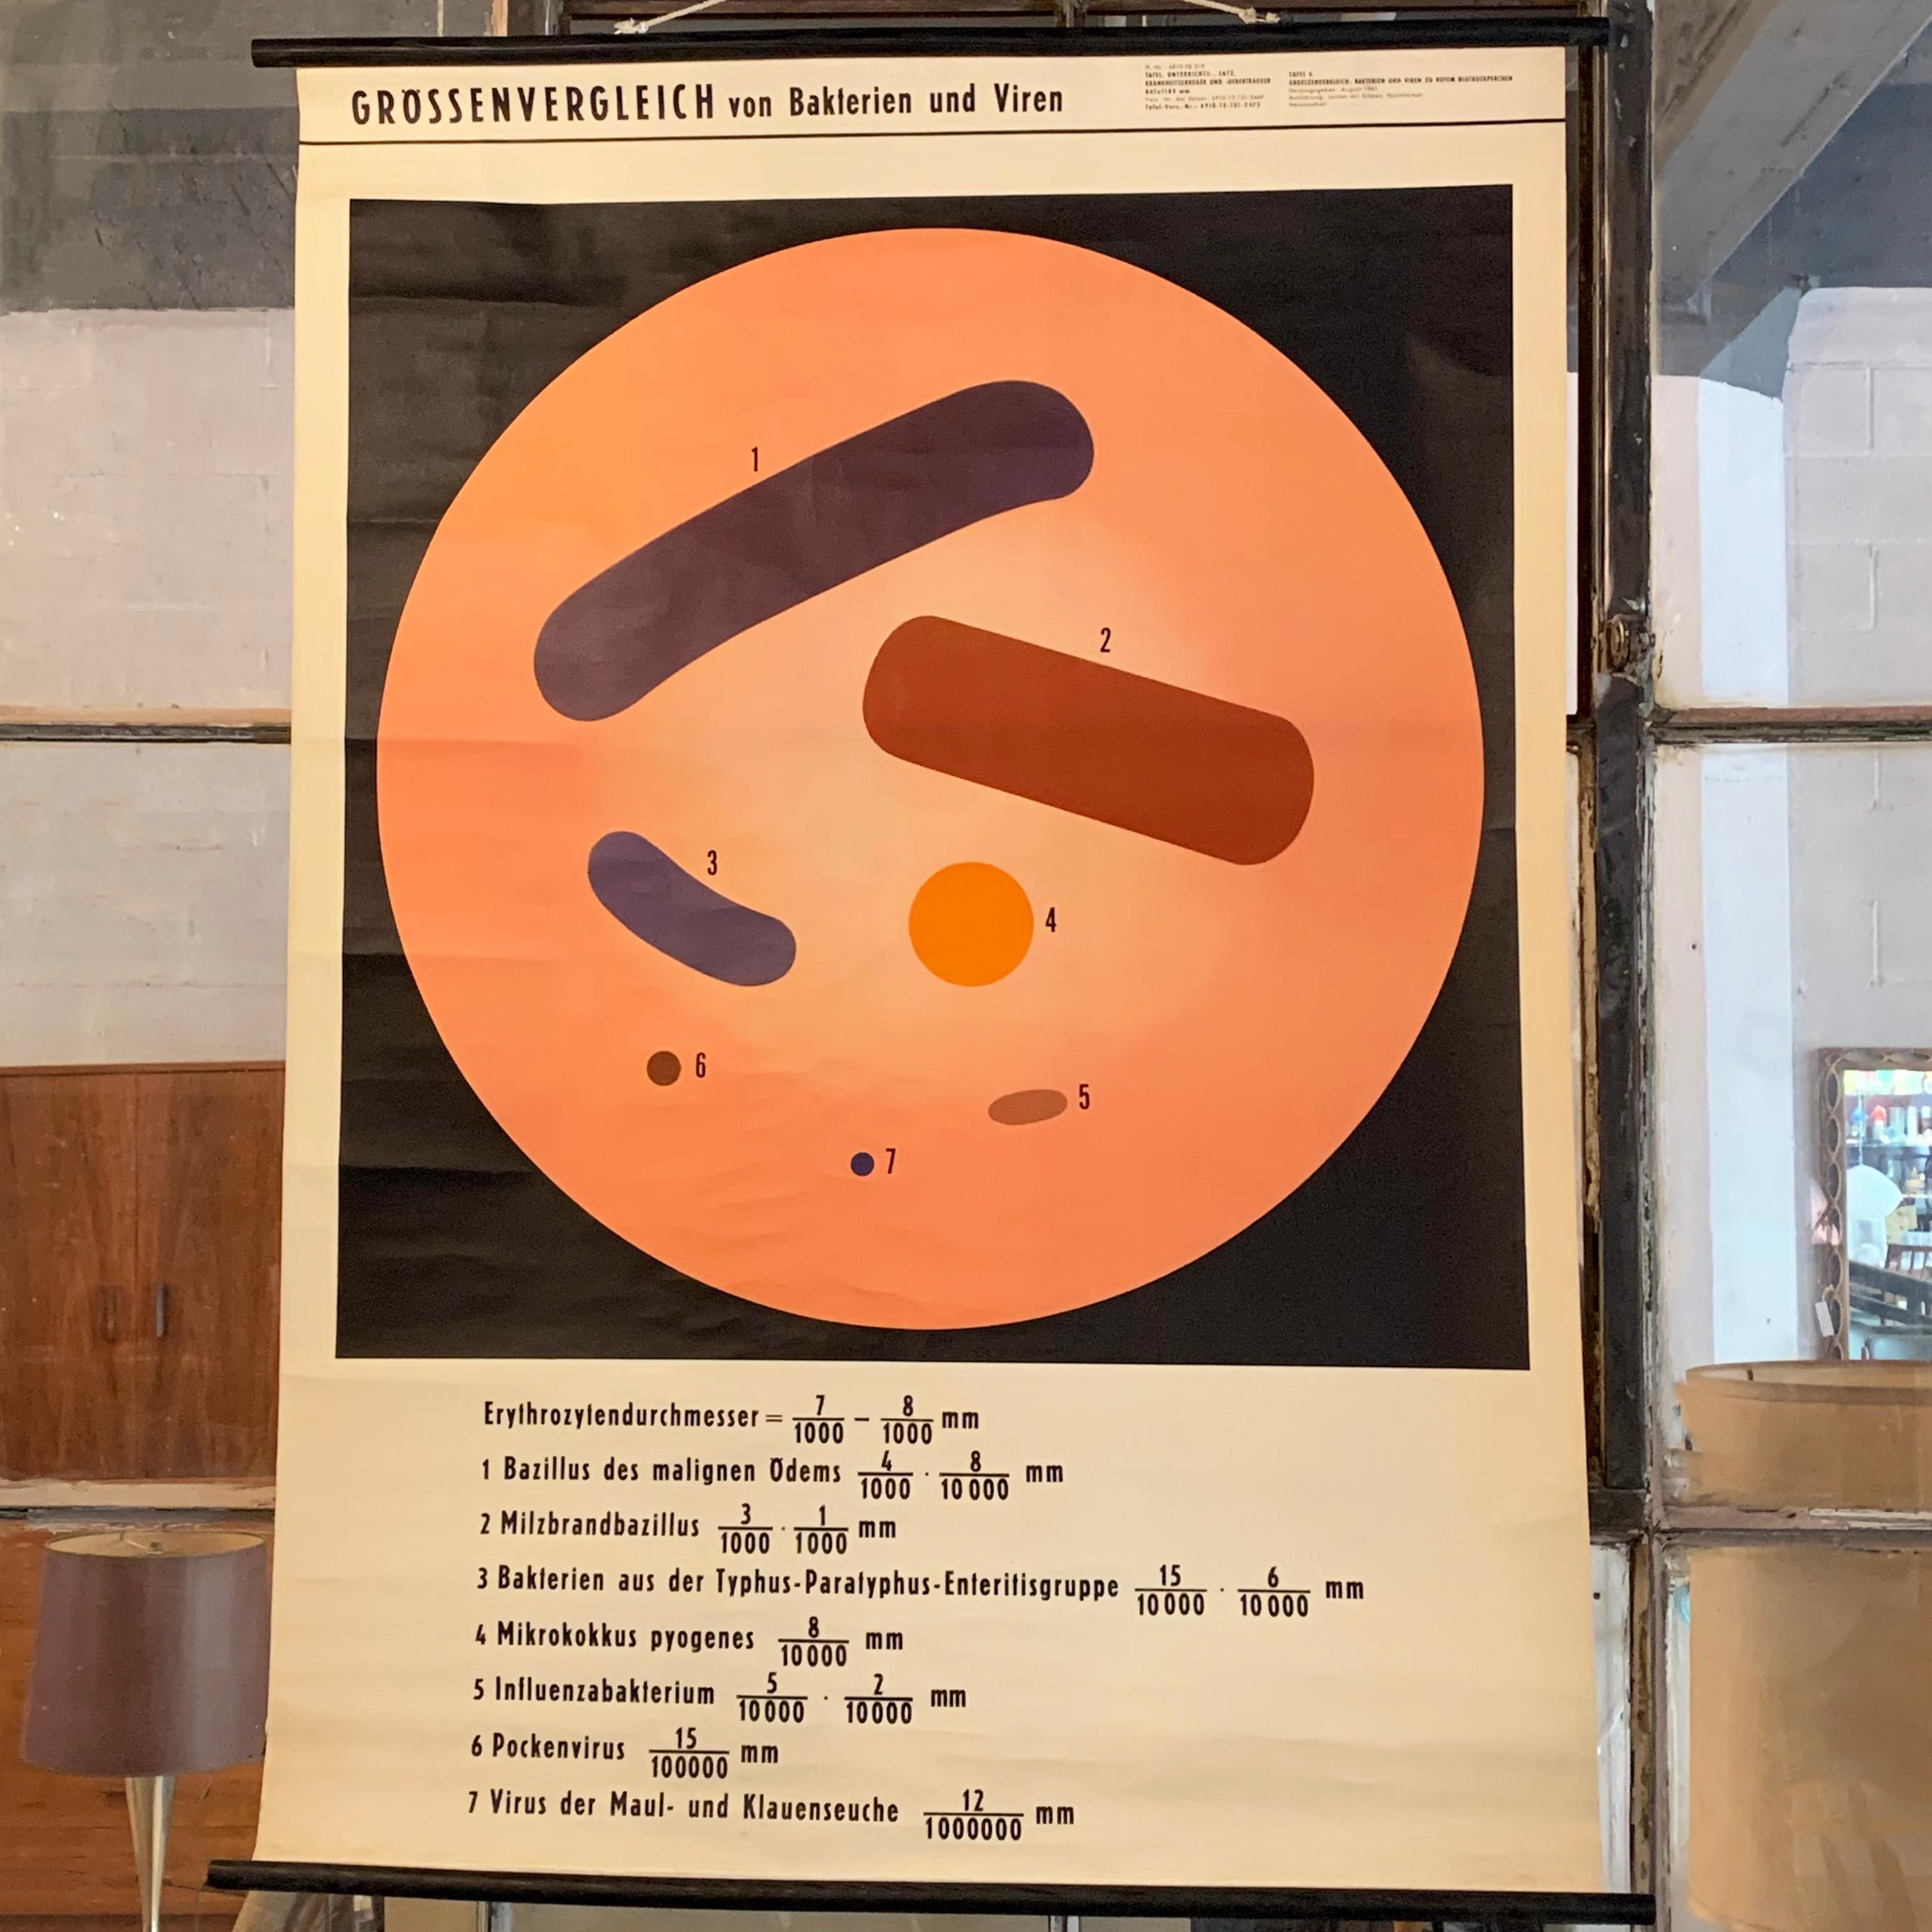 German, educational, anatomical, wall chart comparing the size of bacteria and viruses on fortified canvas paper with wood poles for rolling up.